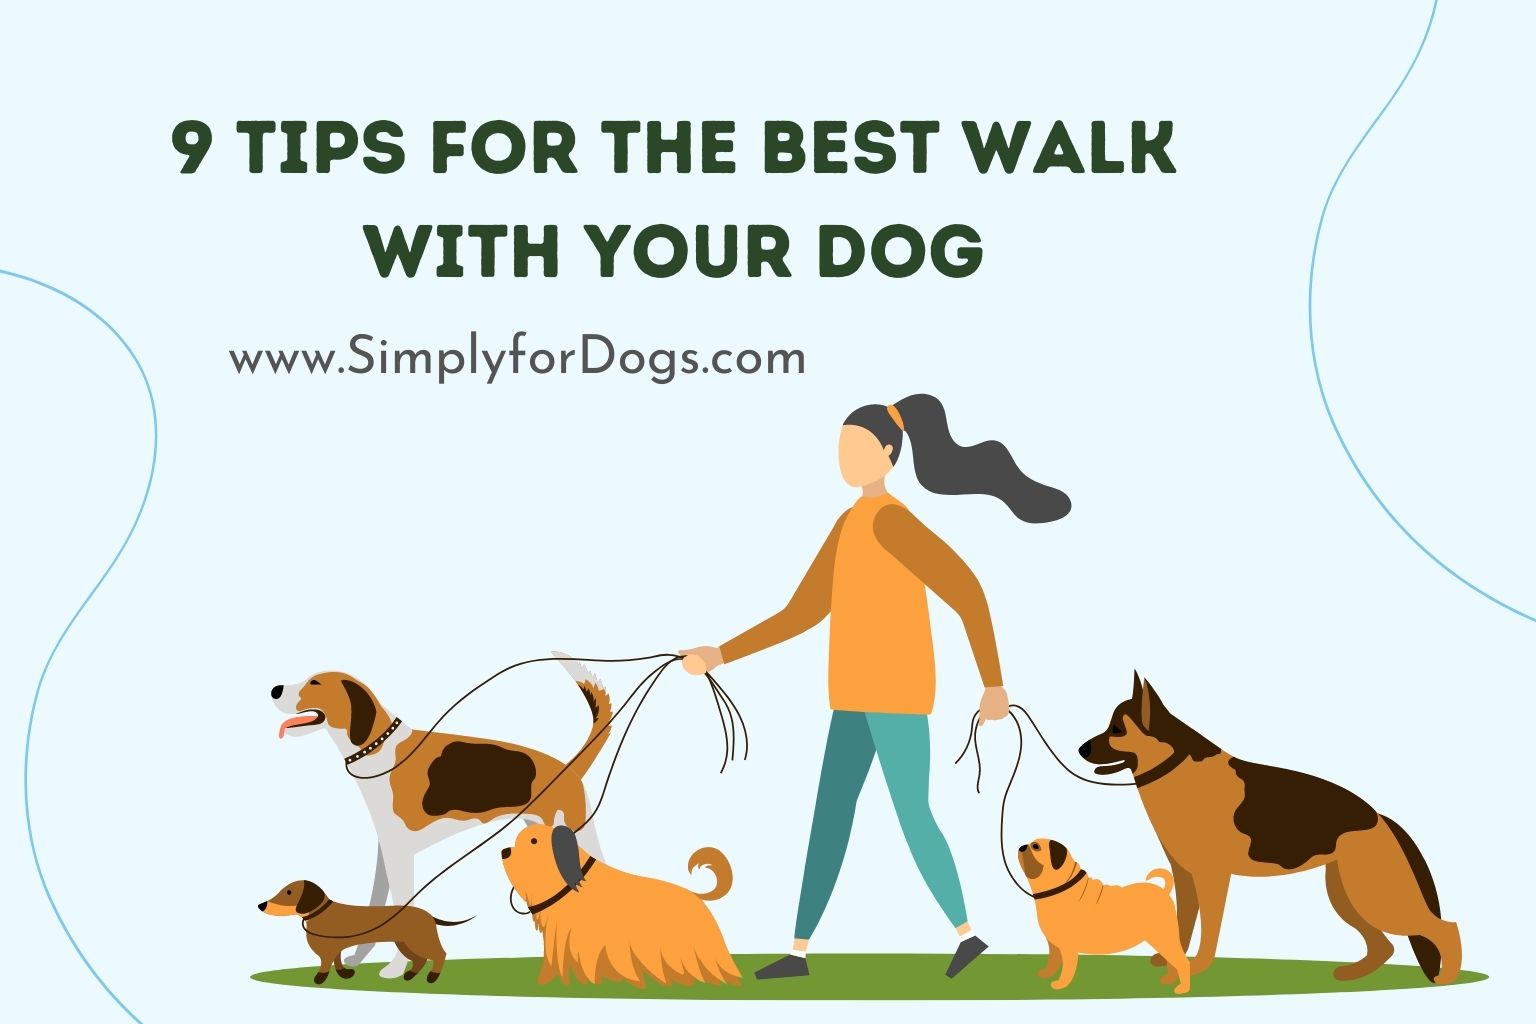 9 Tips for the Best Walk With Your Dog